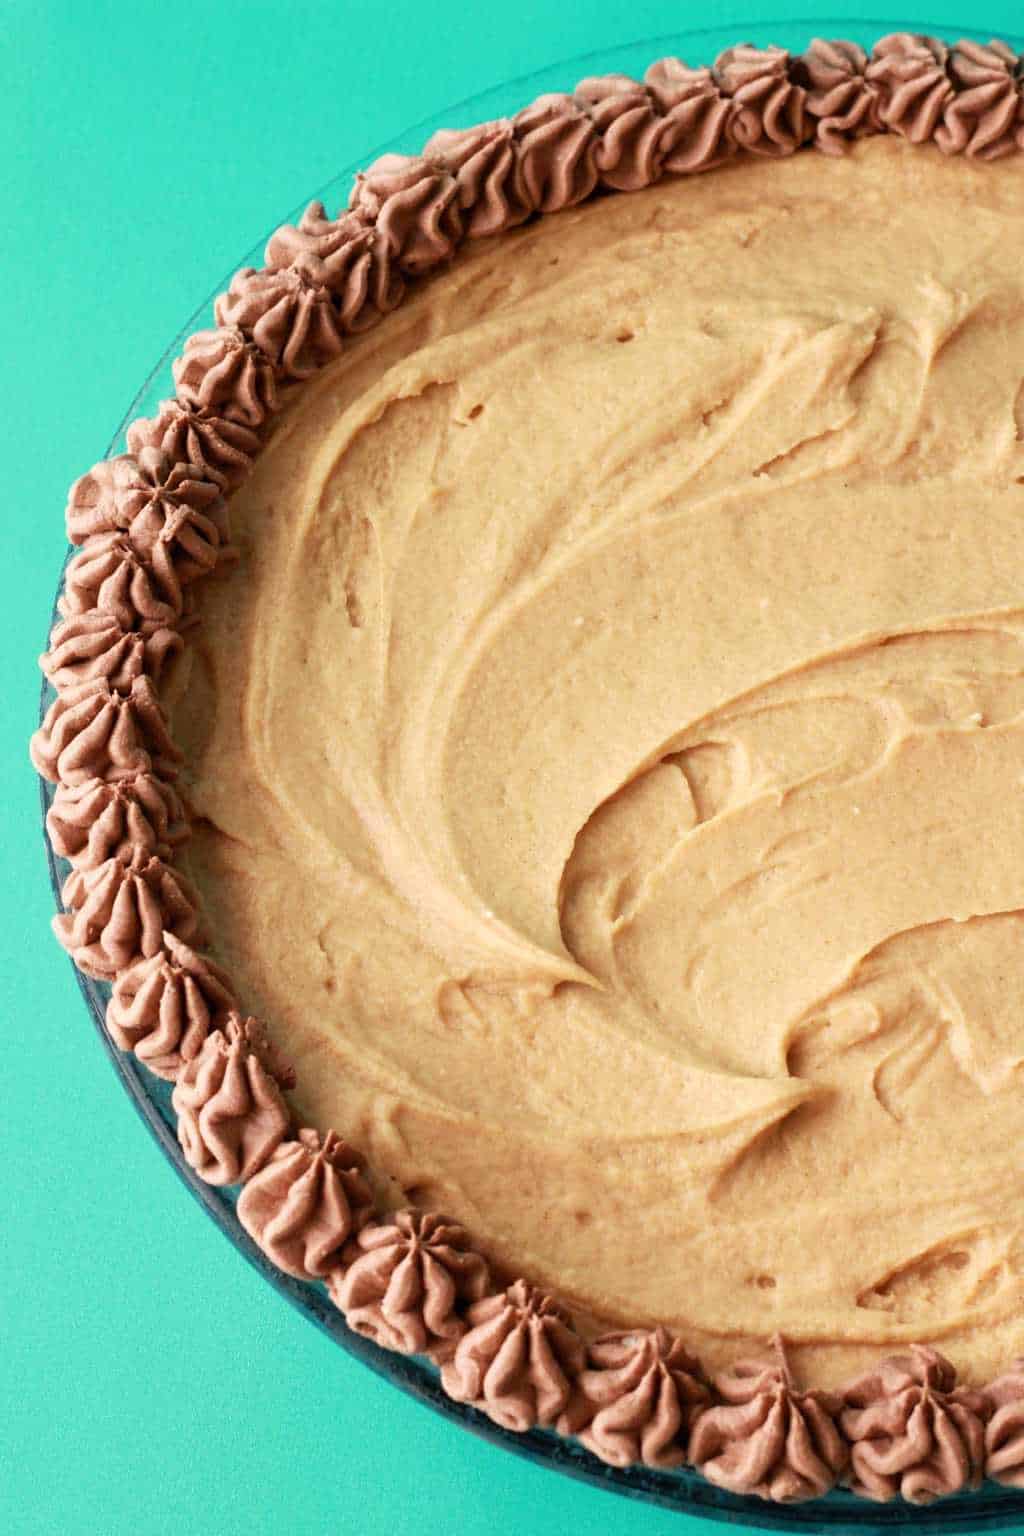 Adding some decorating touches to a vegan peanut butter pie in a glass pie dish. 